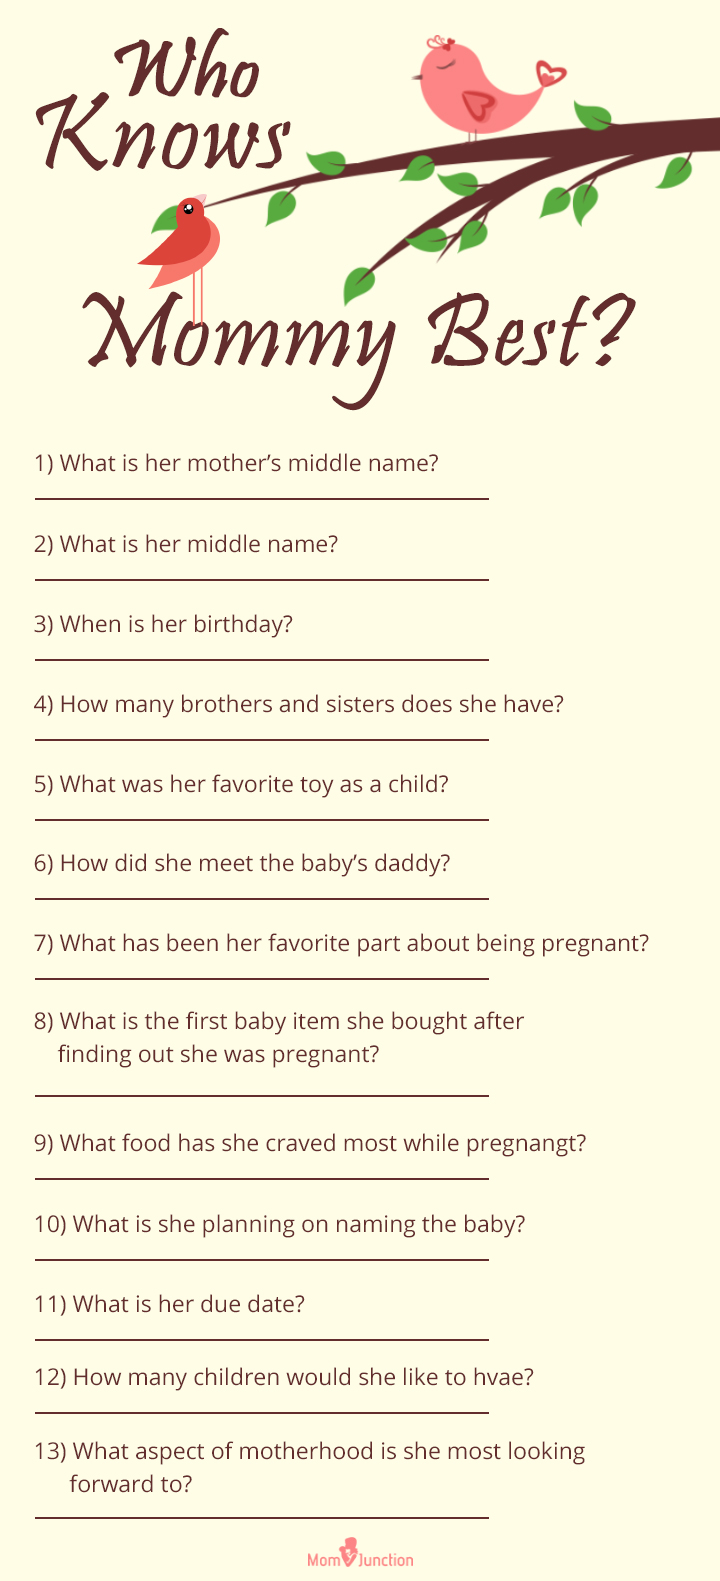 Baby-related questionGame for baby shower games